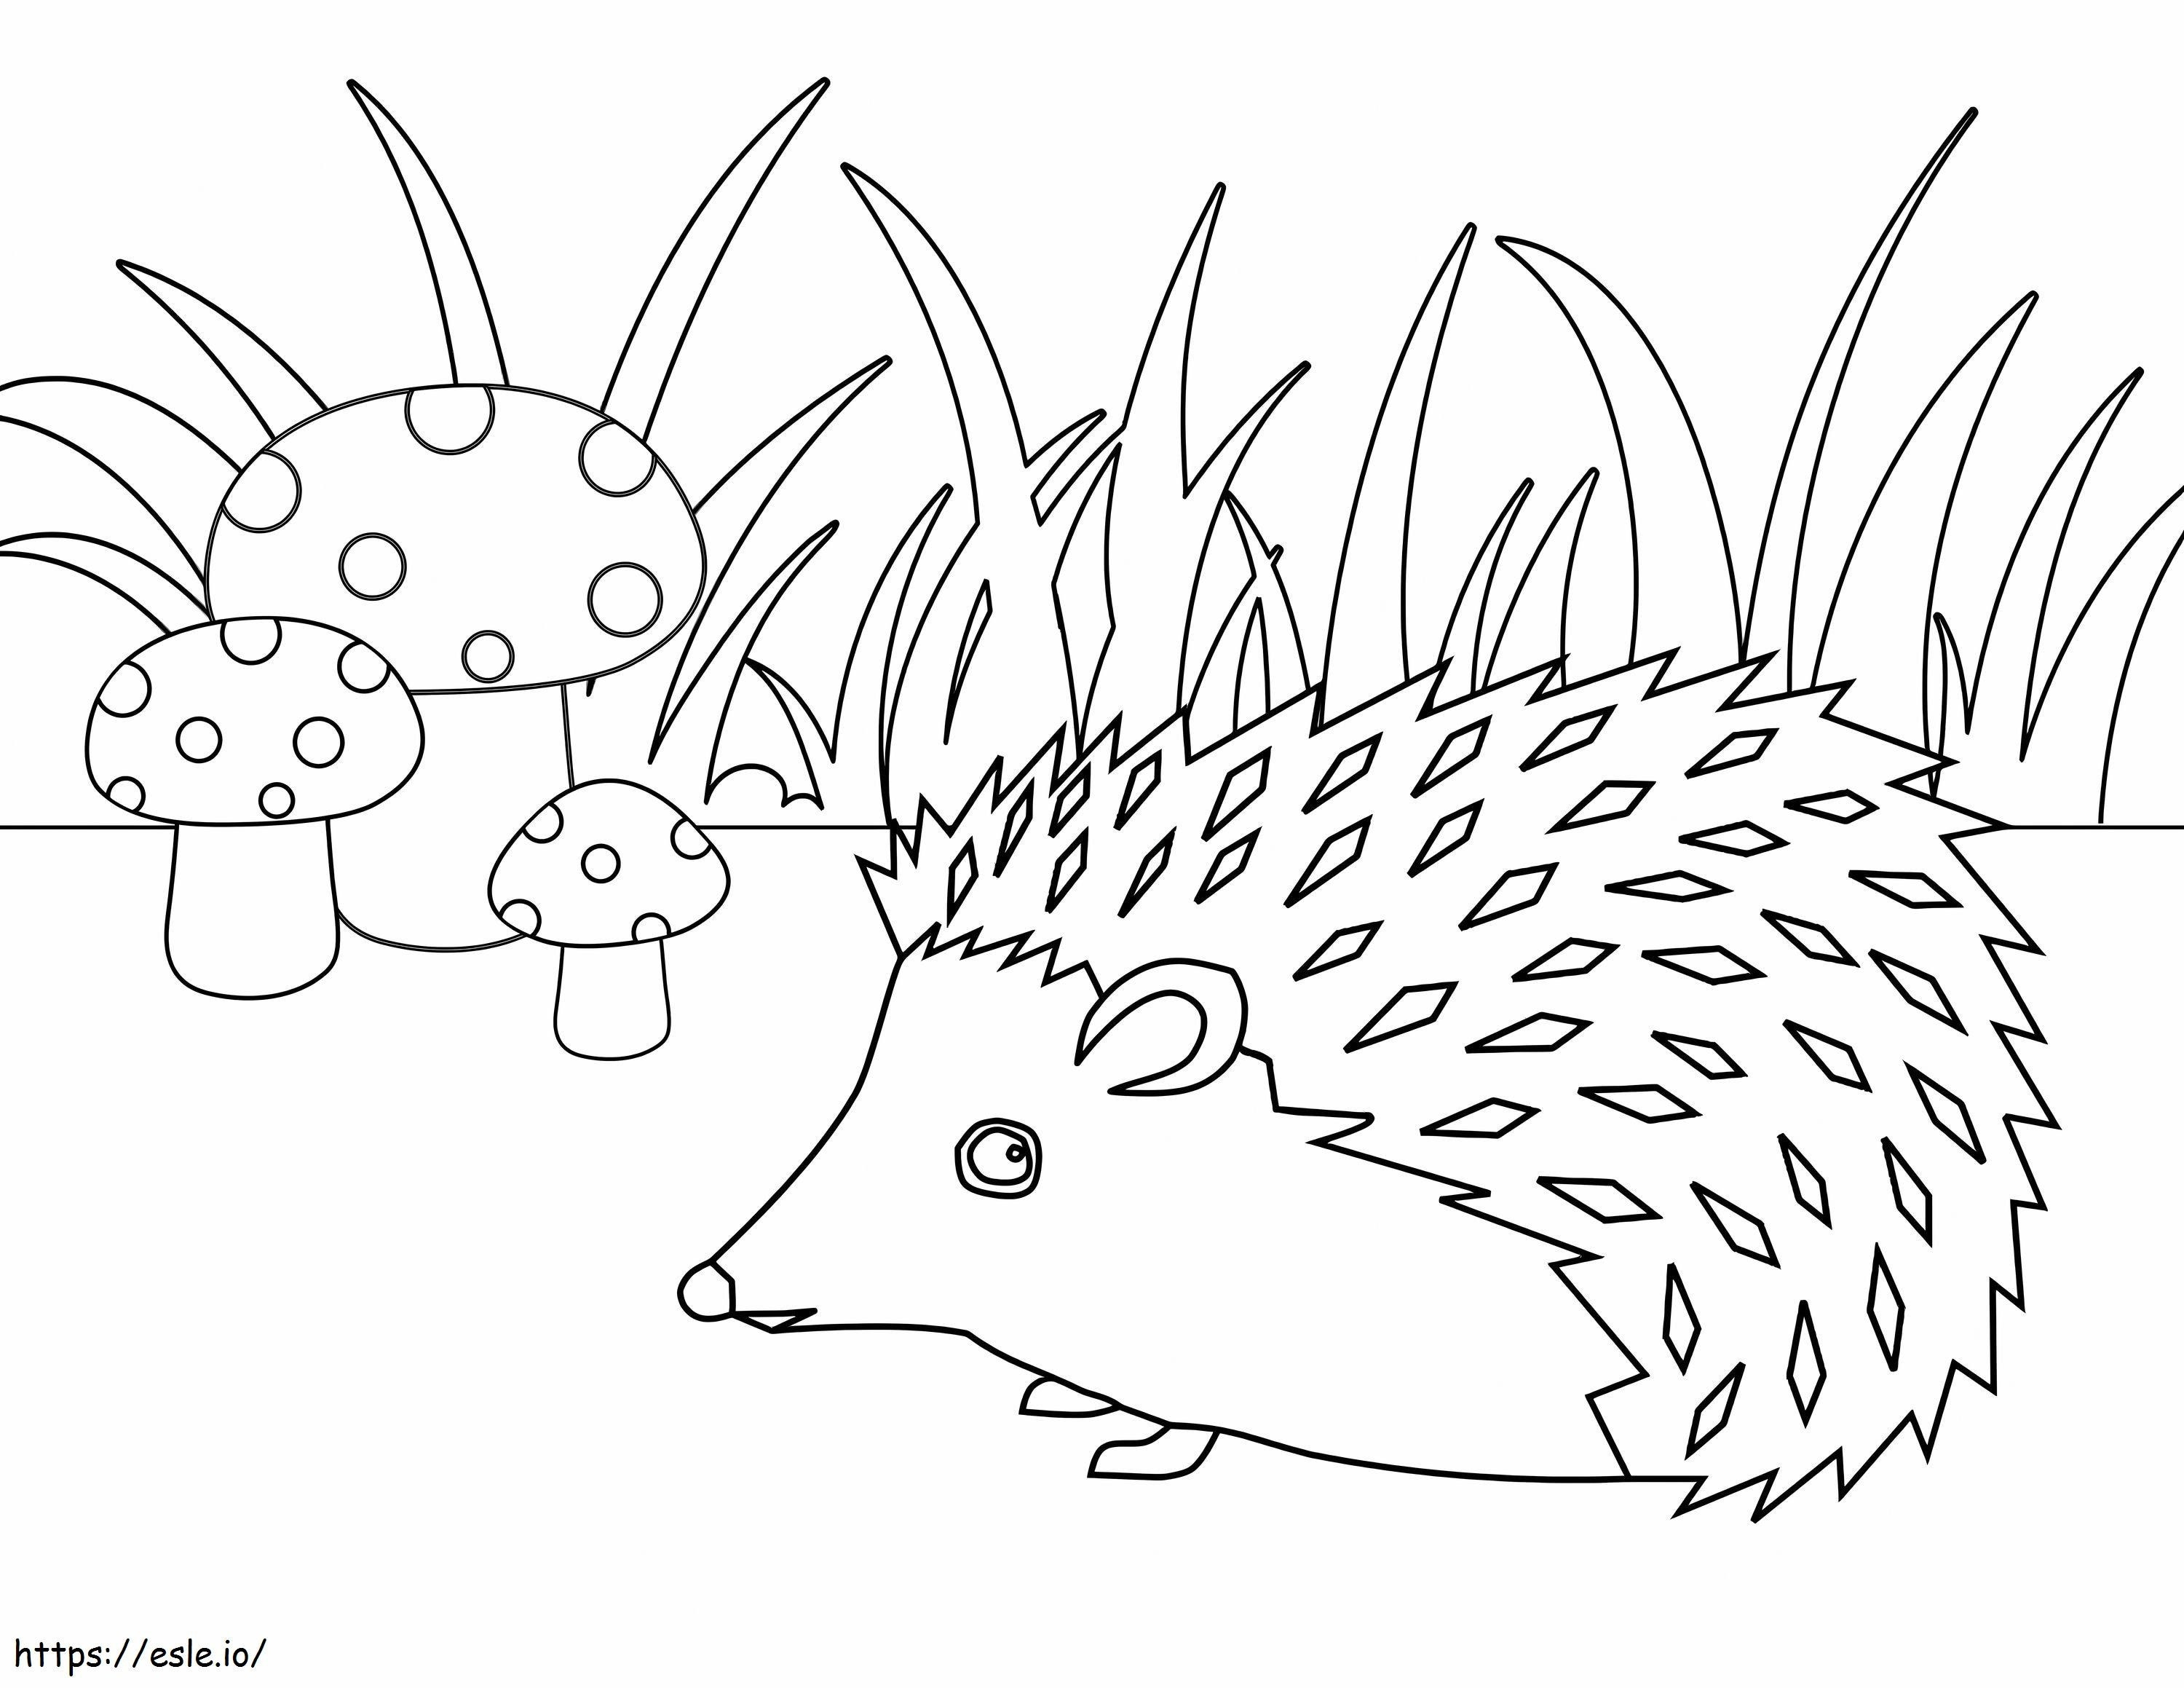 Awesome Hedgehog coloring page